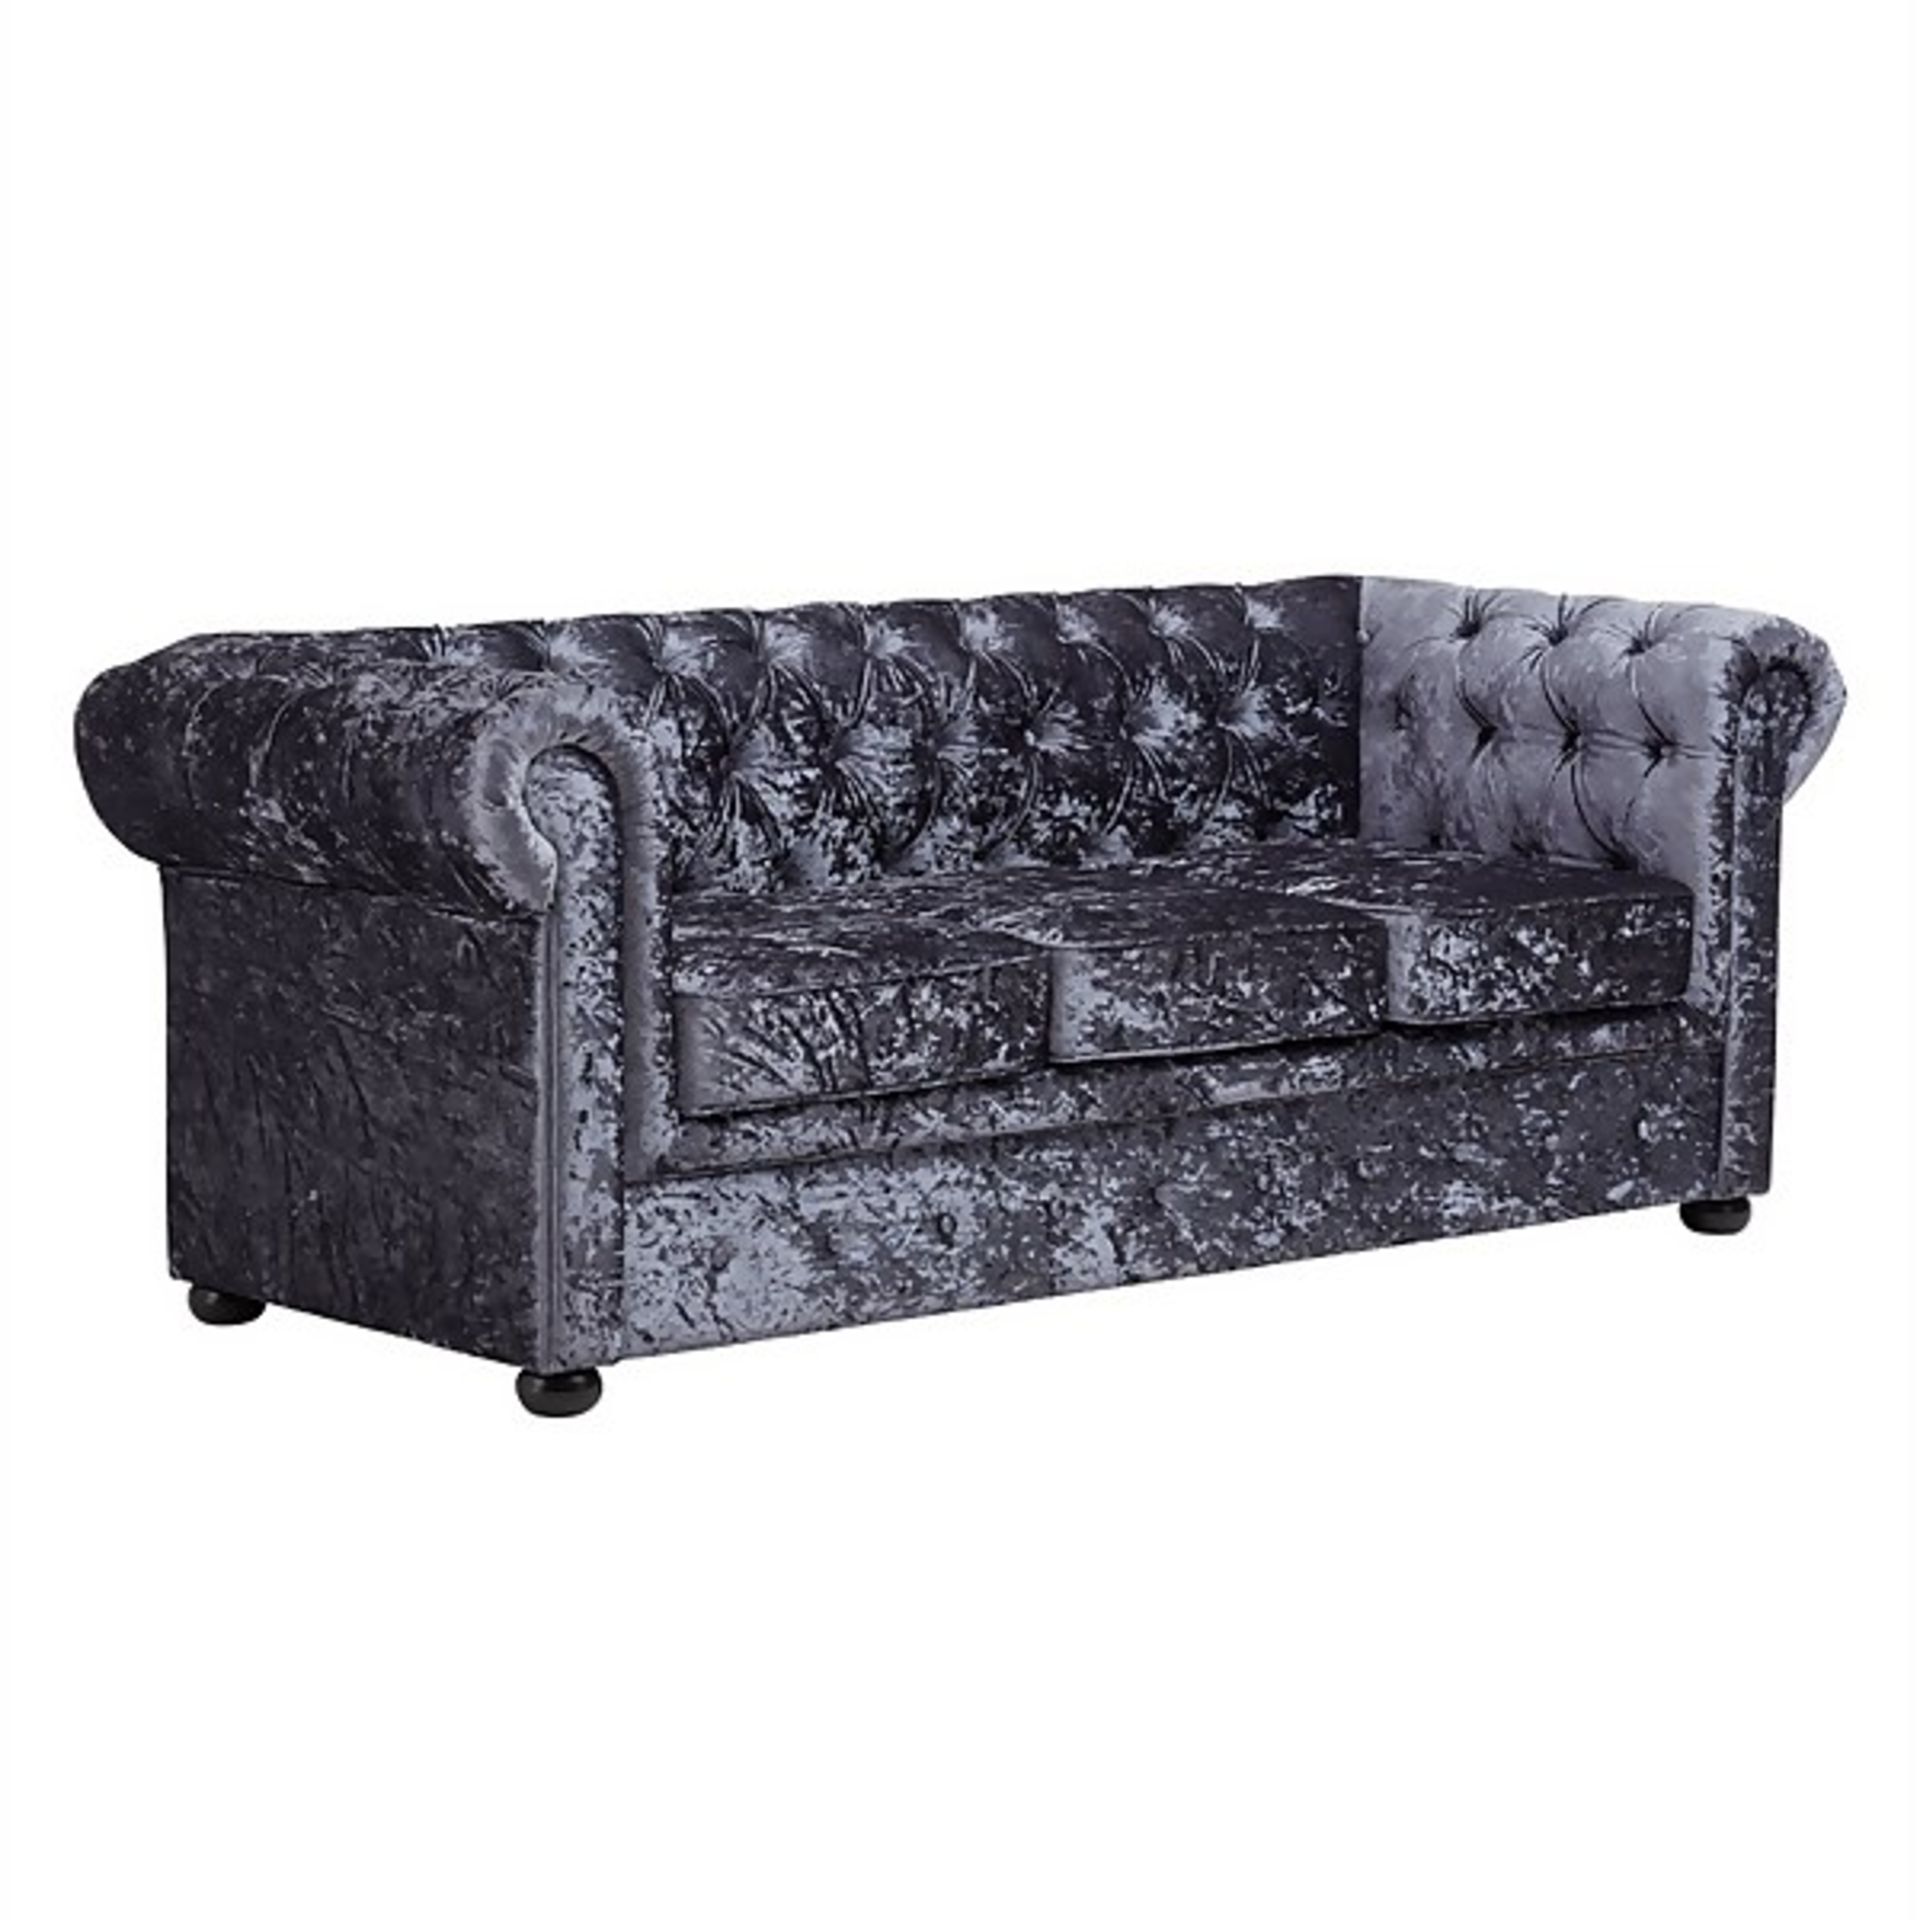 1x Chesterfield Crushed Velvet 3 Seater Sofa Petrol Blue RRP £450. (H)750 x (D)850 x (W)2000mm